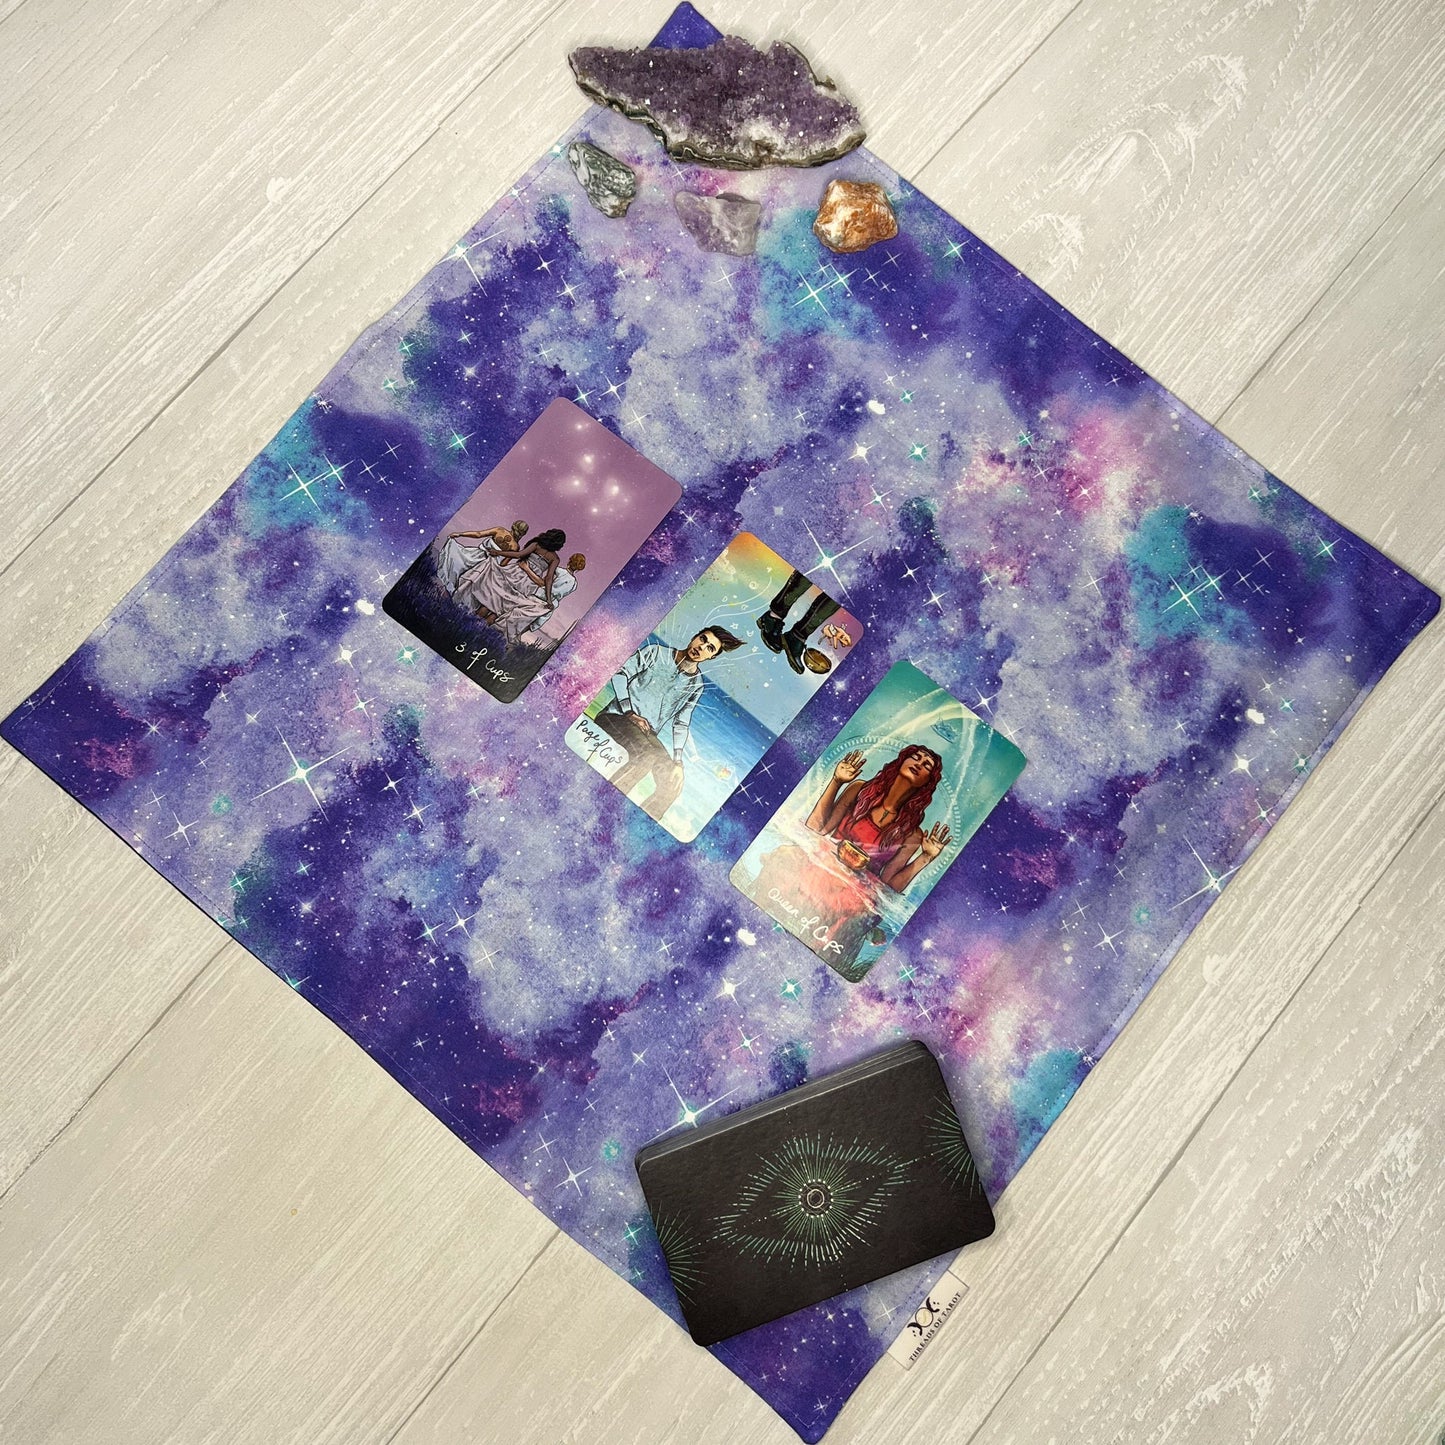 Purple Galactic Altar Cloth, Tarot Reading Cloth, Ritual Cloth, Rune Casting, Tarot Reading Supplies, Witchy Gift Supplies, Divination Tools